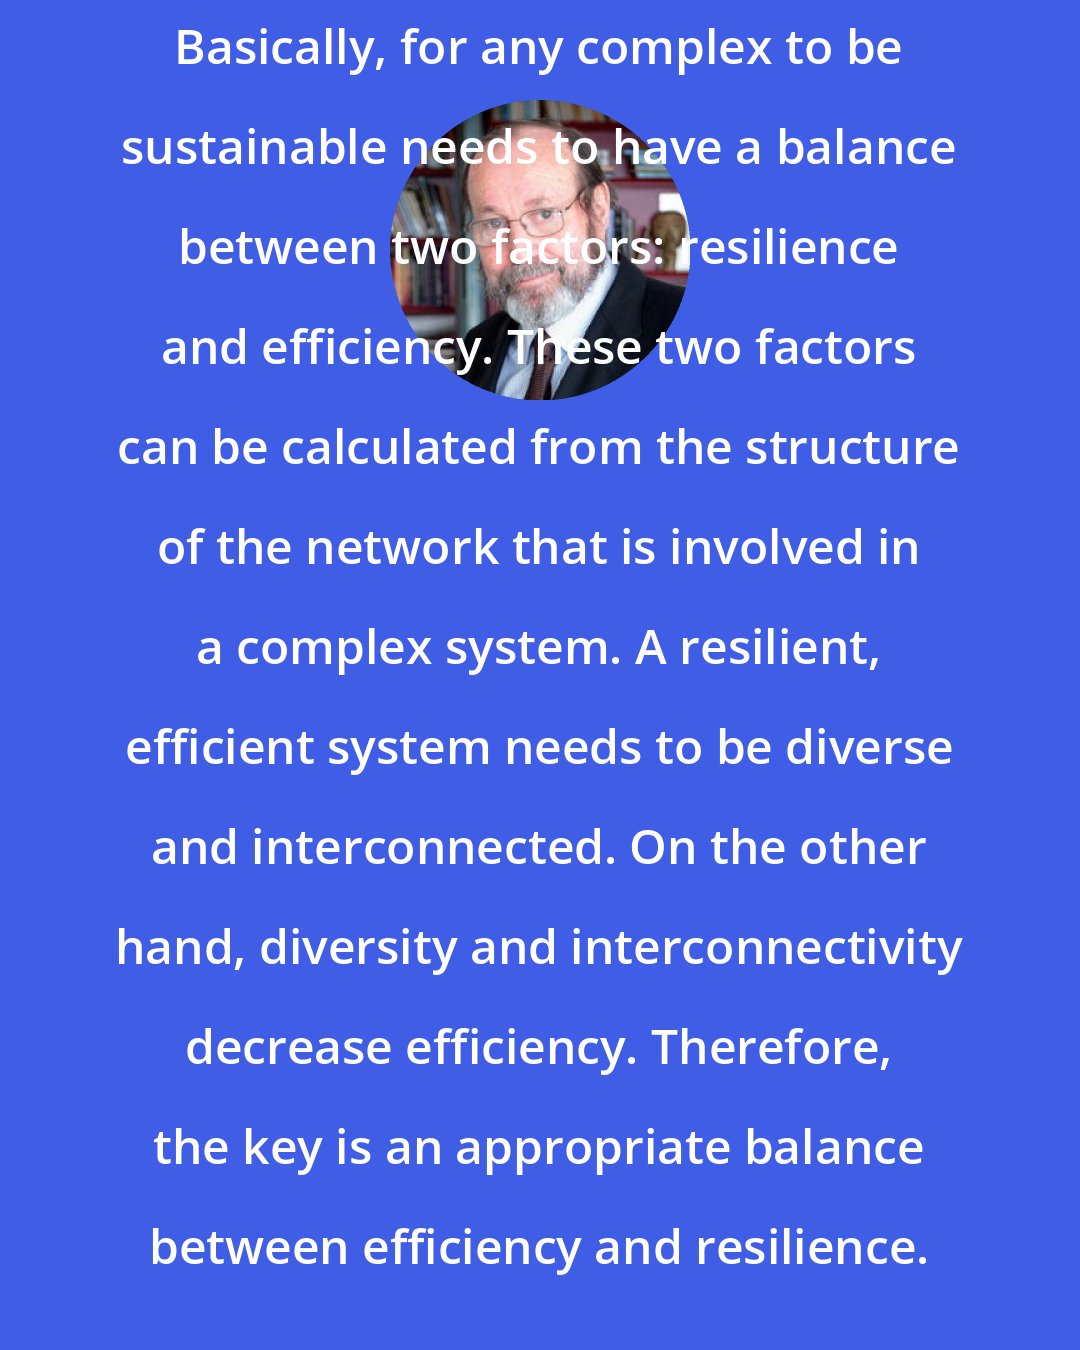 Bernard Lietaer: Basically, for any complex to be sustainable needs to have a balance between two factors: resilience and efficiency. These two factors can be calculated from the structure of the network that is involved in a complex system. A resilient, efficient system needs to be diverse and interconnected. On the other hand, diversity and interconnectivity decrease efficiency. Therefore, the key is an appropriate balance between efficiency and resilience.